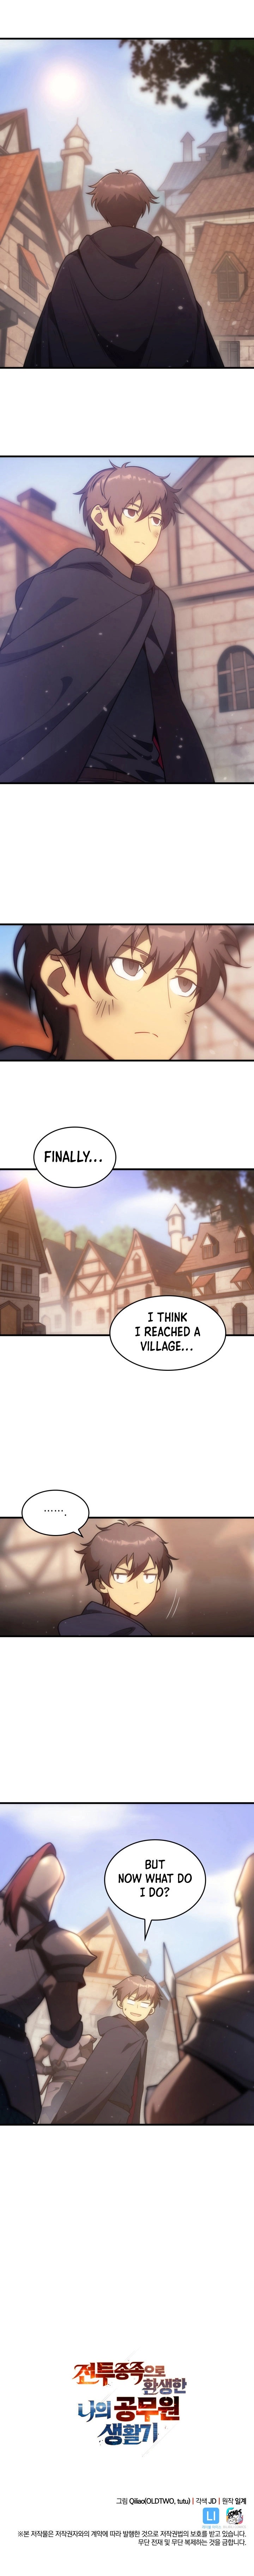 My Civil Servant Life Reborn in the Strange World - Chapter 3 Page 7